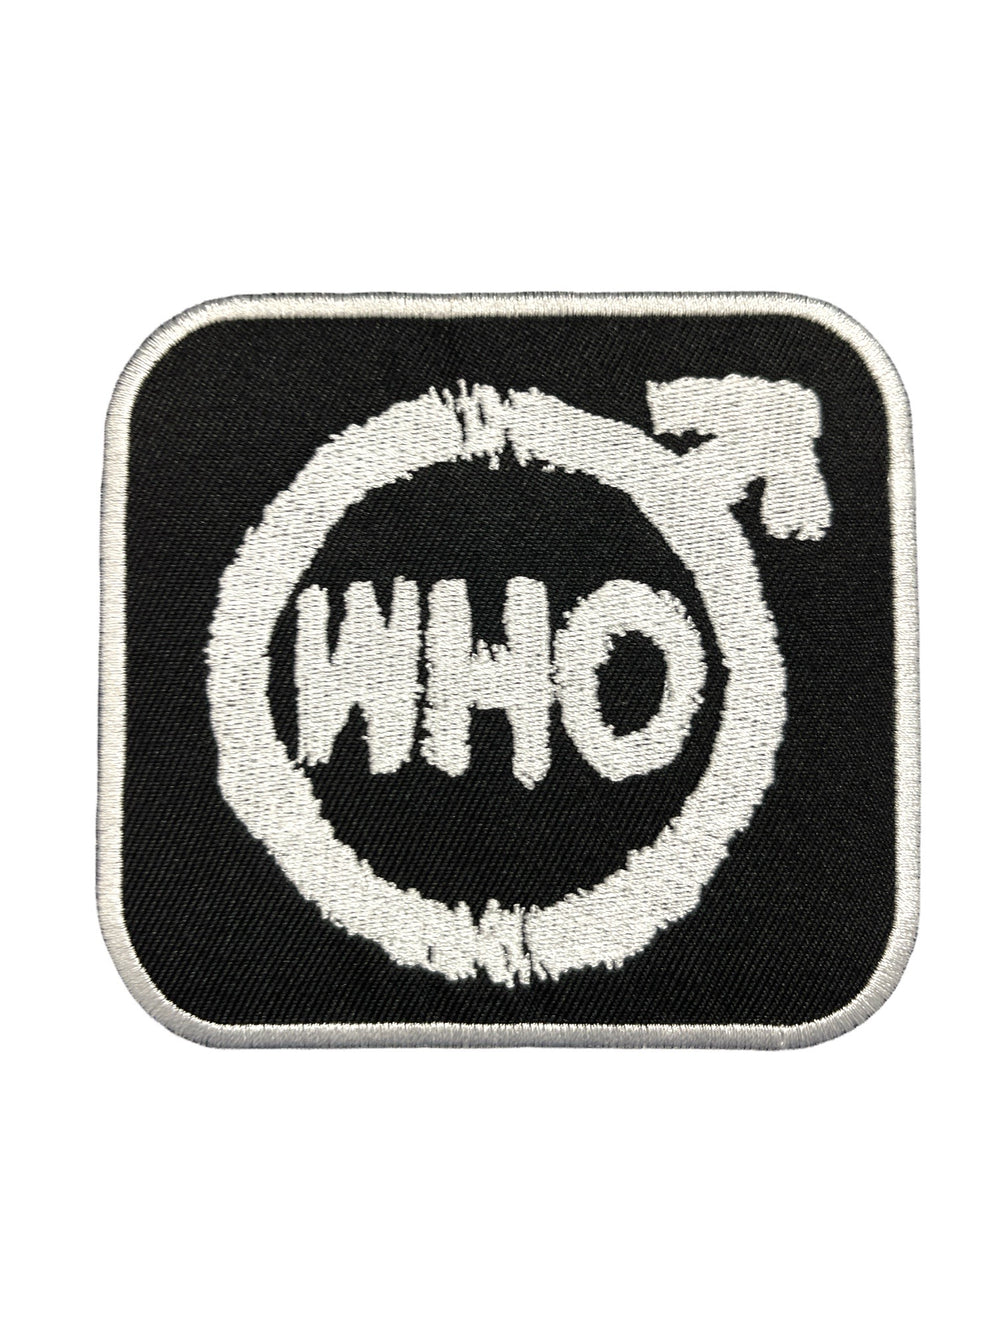 Who The - Spray Logo Official Woven Patch Brand New